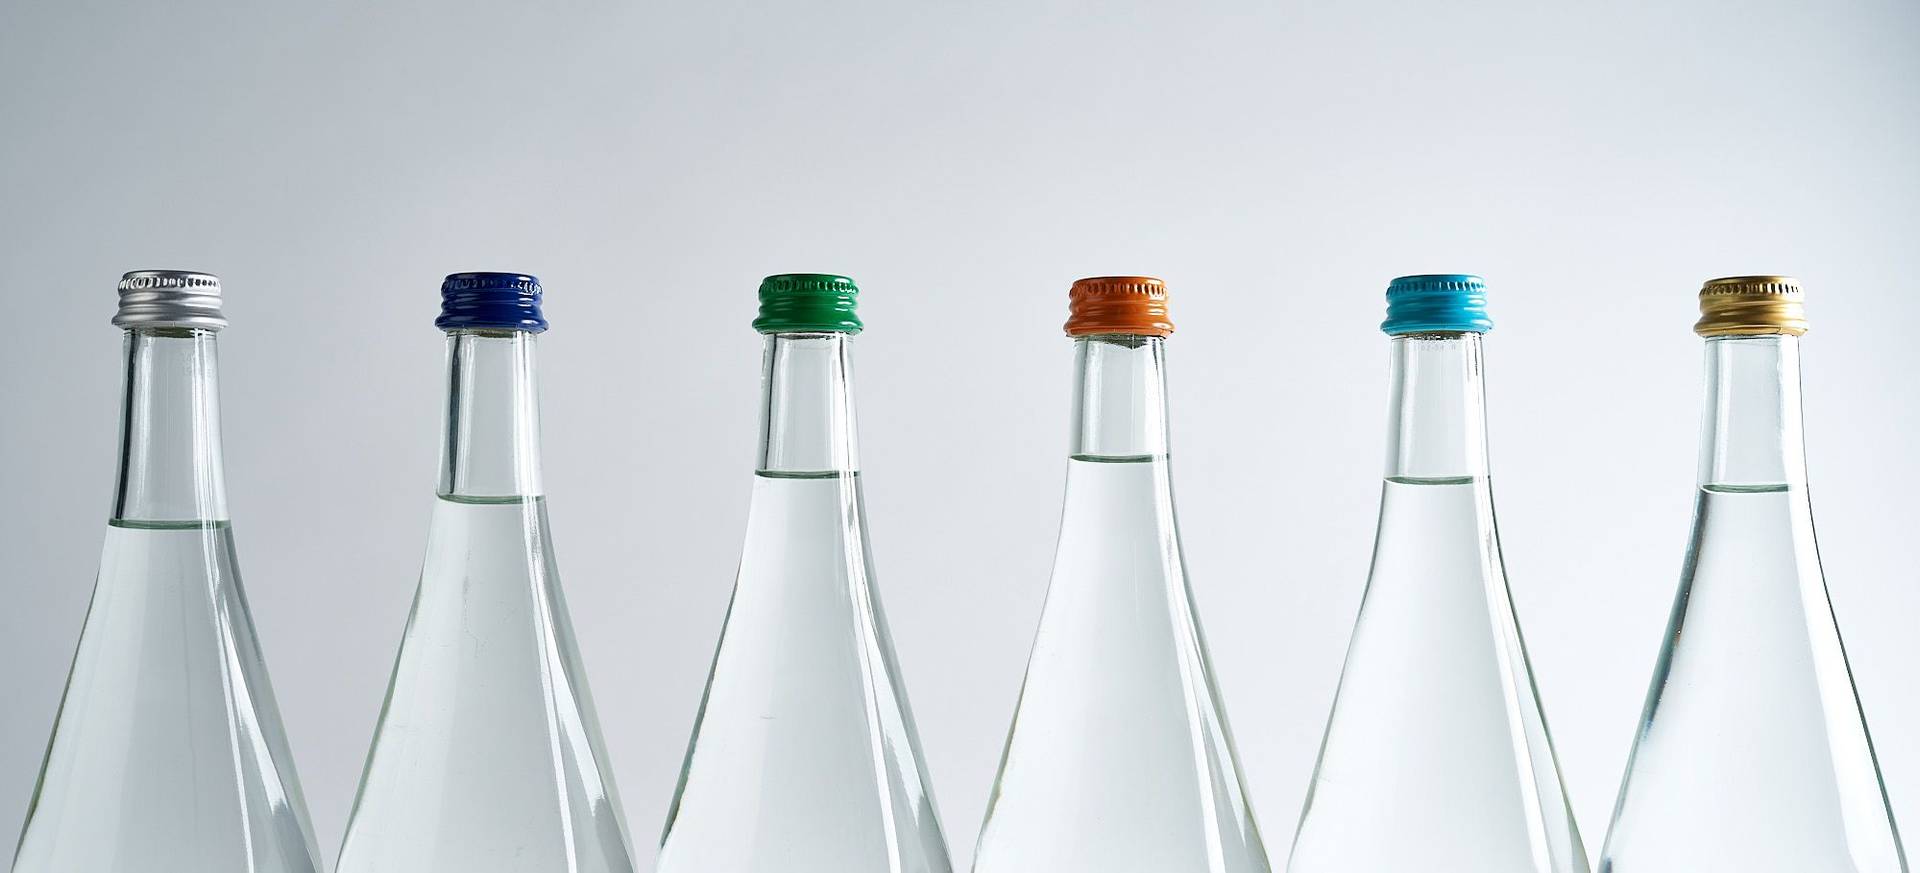 The mineral water guide